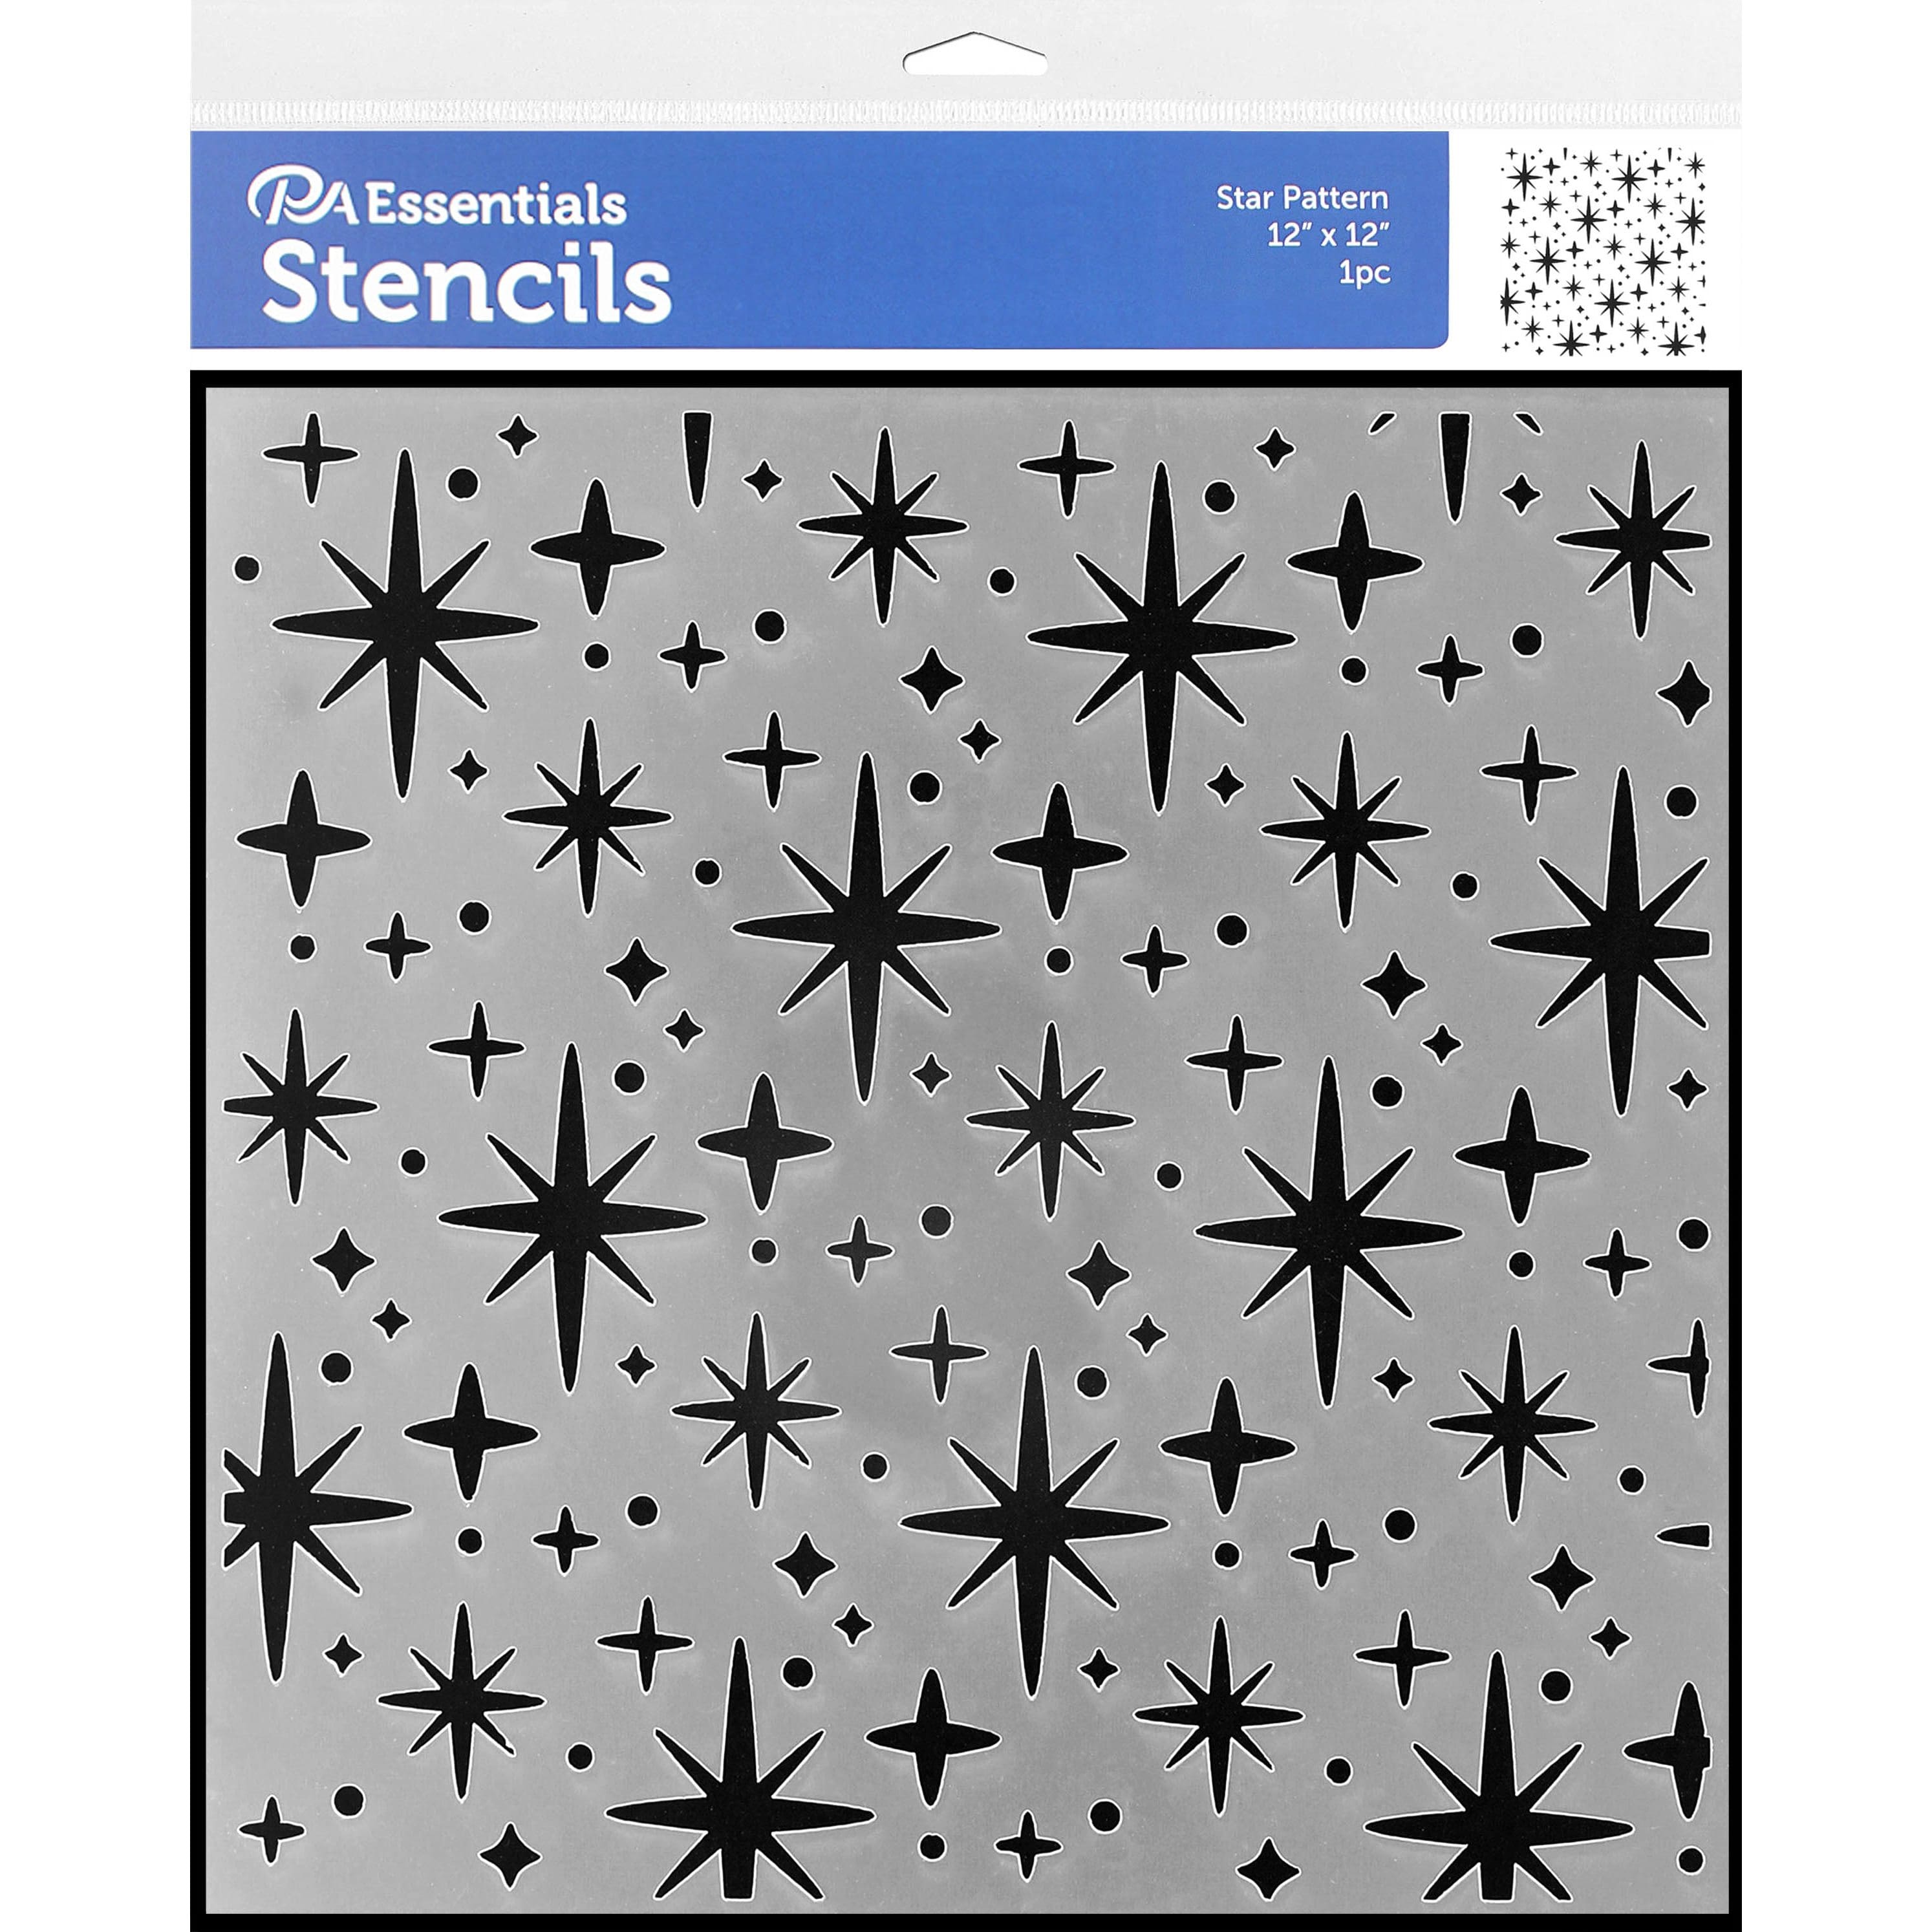 PA Essentials Stencil Star Pattern for Painting on Wood, Canvas